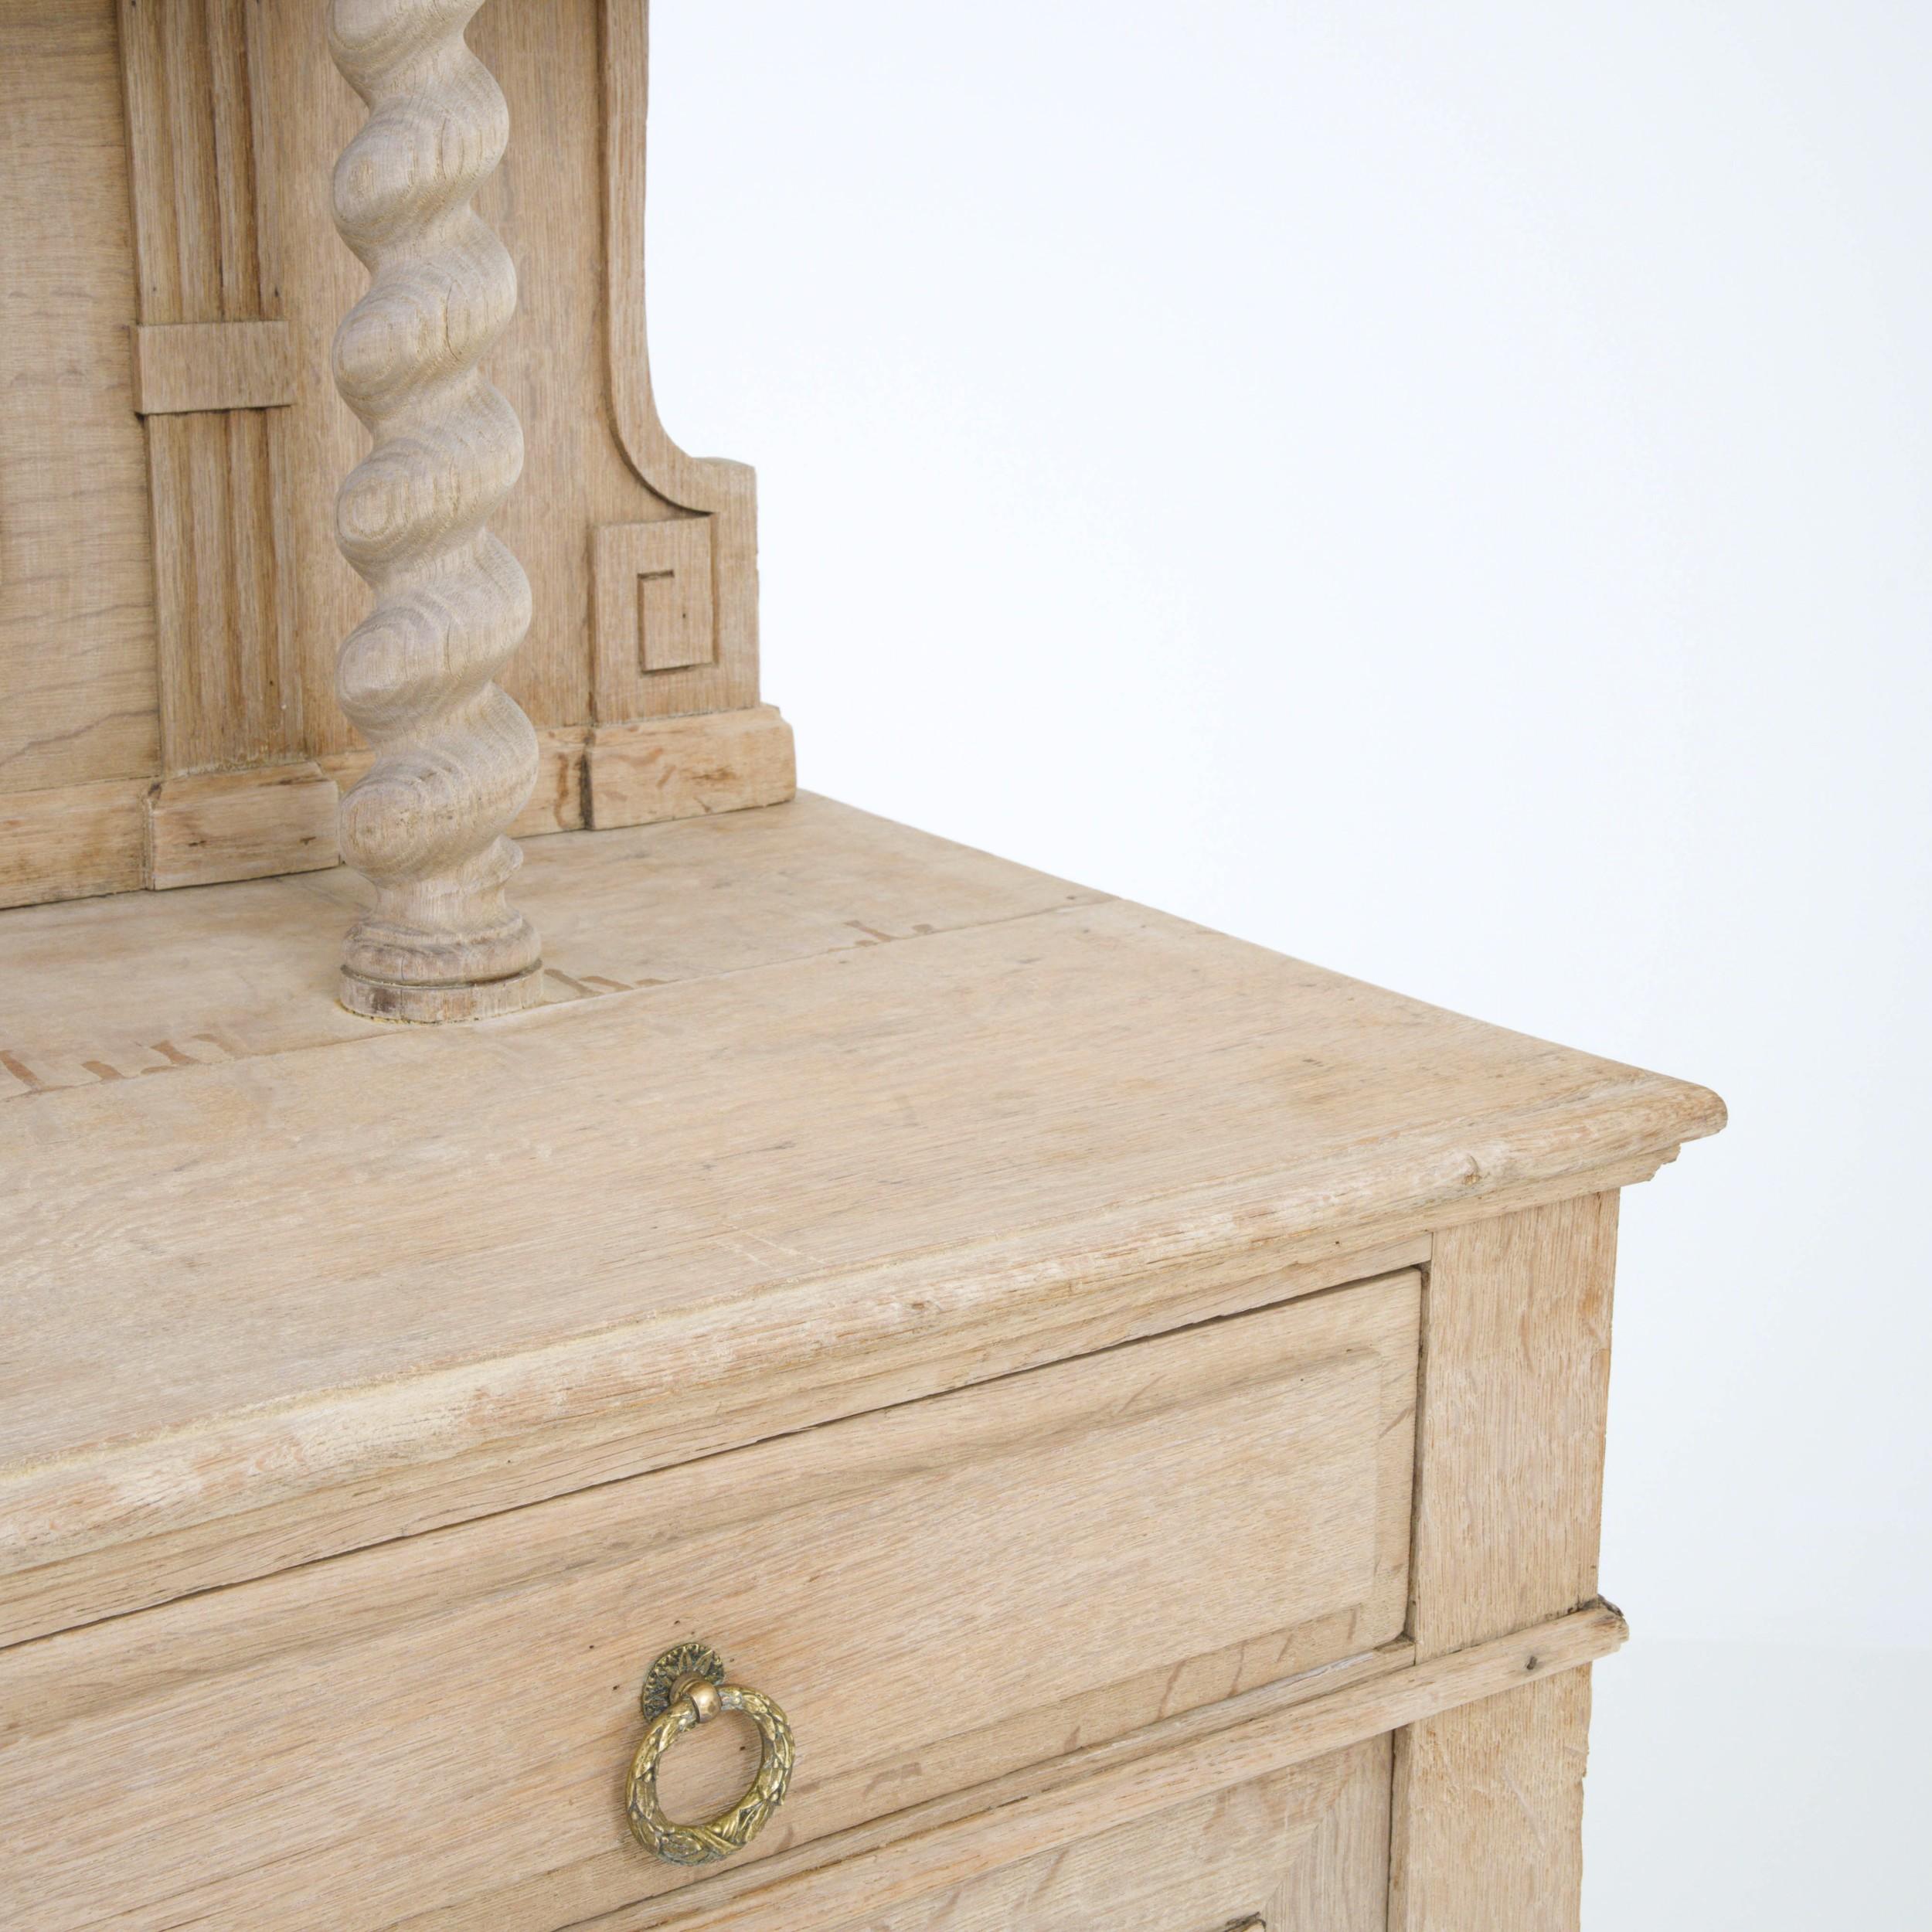 19th Century Belgian Bleached Oak Buffet with Sculpted Shelf For Sale 6